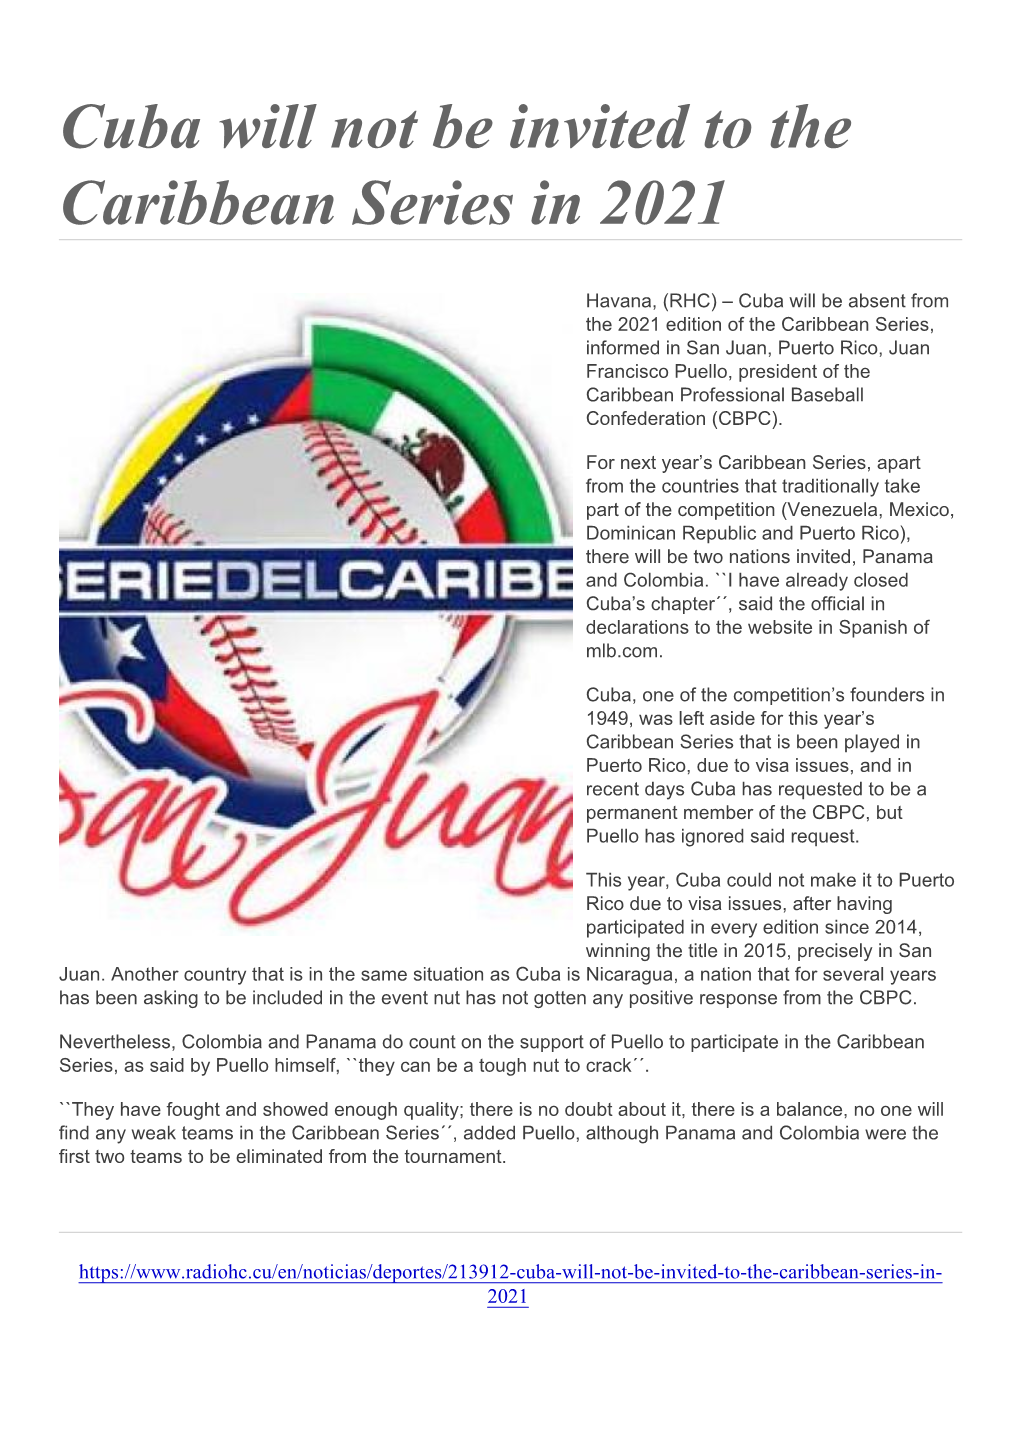 Cuba Will Not Be Invited to the Caribbean Series in 2021